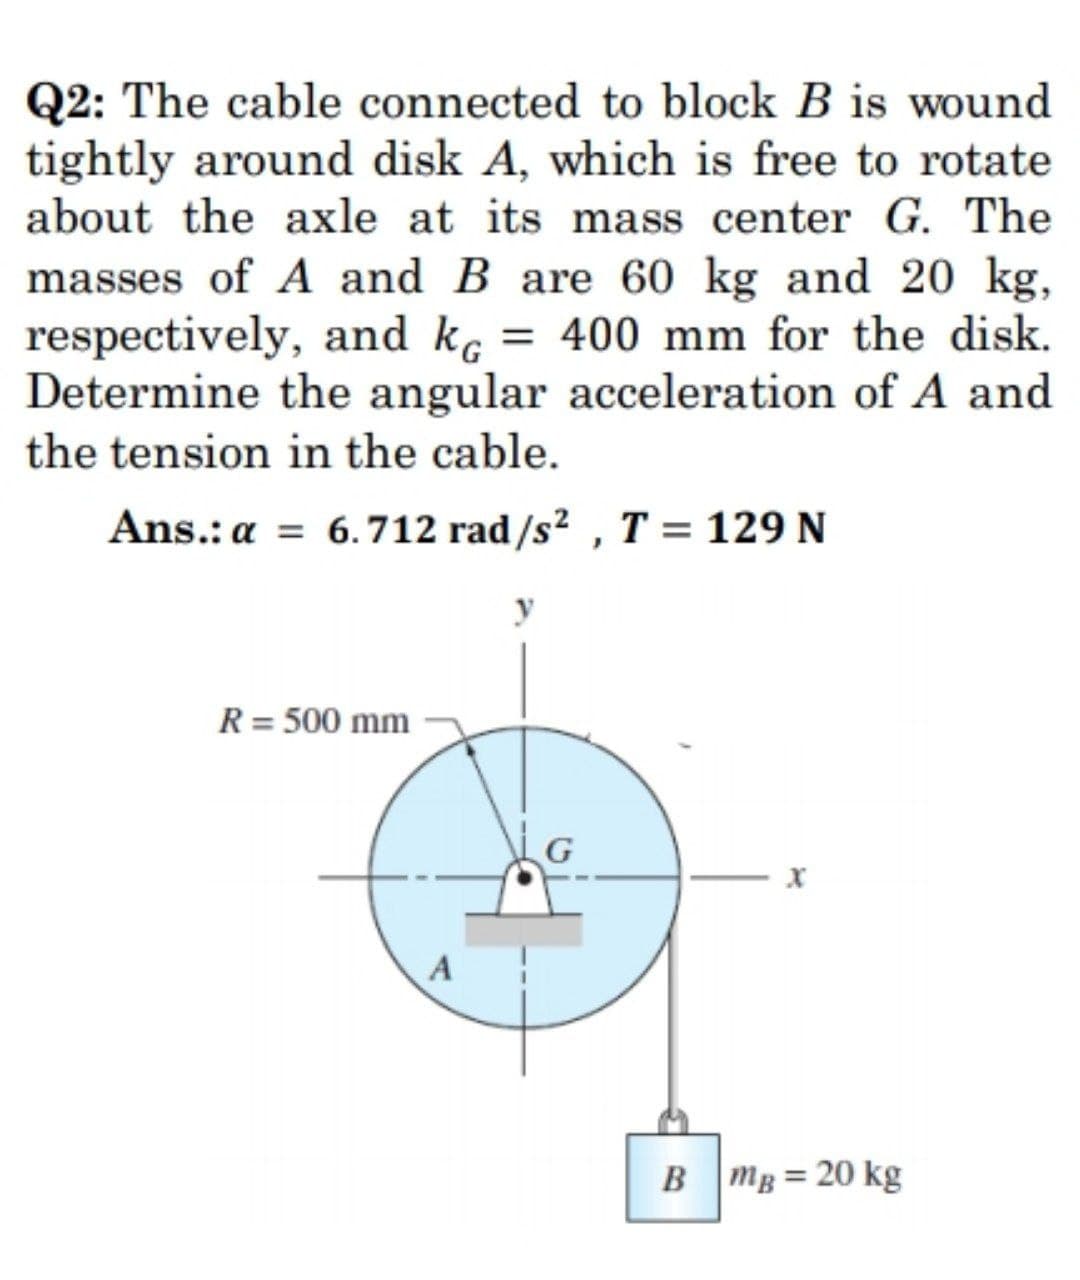 Q2: The cable connected to block B is wound
tightly around disk A, which is free to rotate
about the axle at its mass center G. The
masses of A and B are 60 kg and 20 kg,
respectively, and kç = 400 mm for the disk.
Determine the angular acceleration of A and
the tension in the cable.
Ans.: a = 6.712 rad/s2 , T = 129 N
%3D
R = 500 mm
A
B mg = 20 kg
